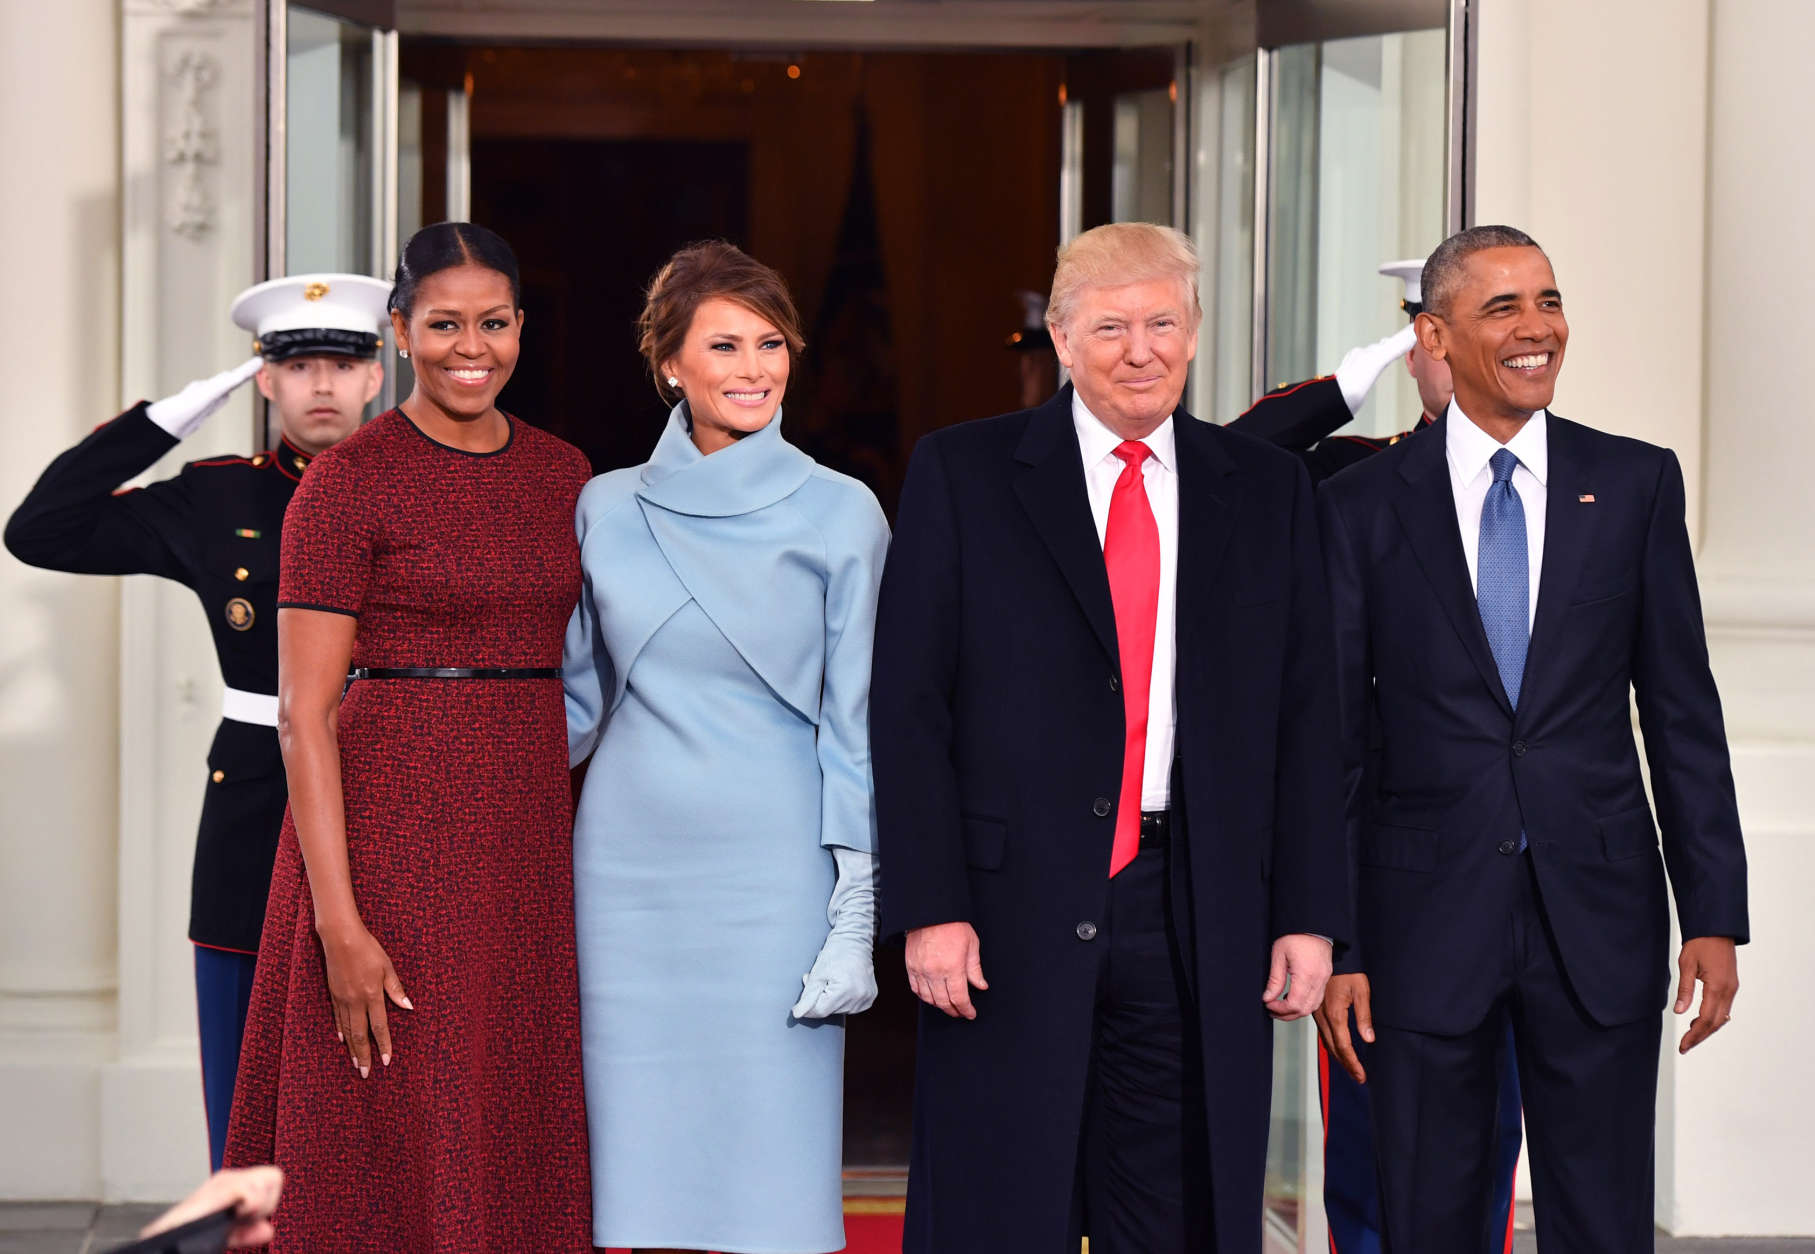 WASHINGTON, DC - JANUARY 20:   President Barack Obama (R) and Michelle Obama (L) pose with President-elect Donald Trump and wife Melania at the White House before the inauguration on January 20, 2017 in Washington, D.C.  Trump becomes the 45th President of the United States.   (Photo by Kevin Dietsch-Pool/Getty Images)